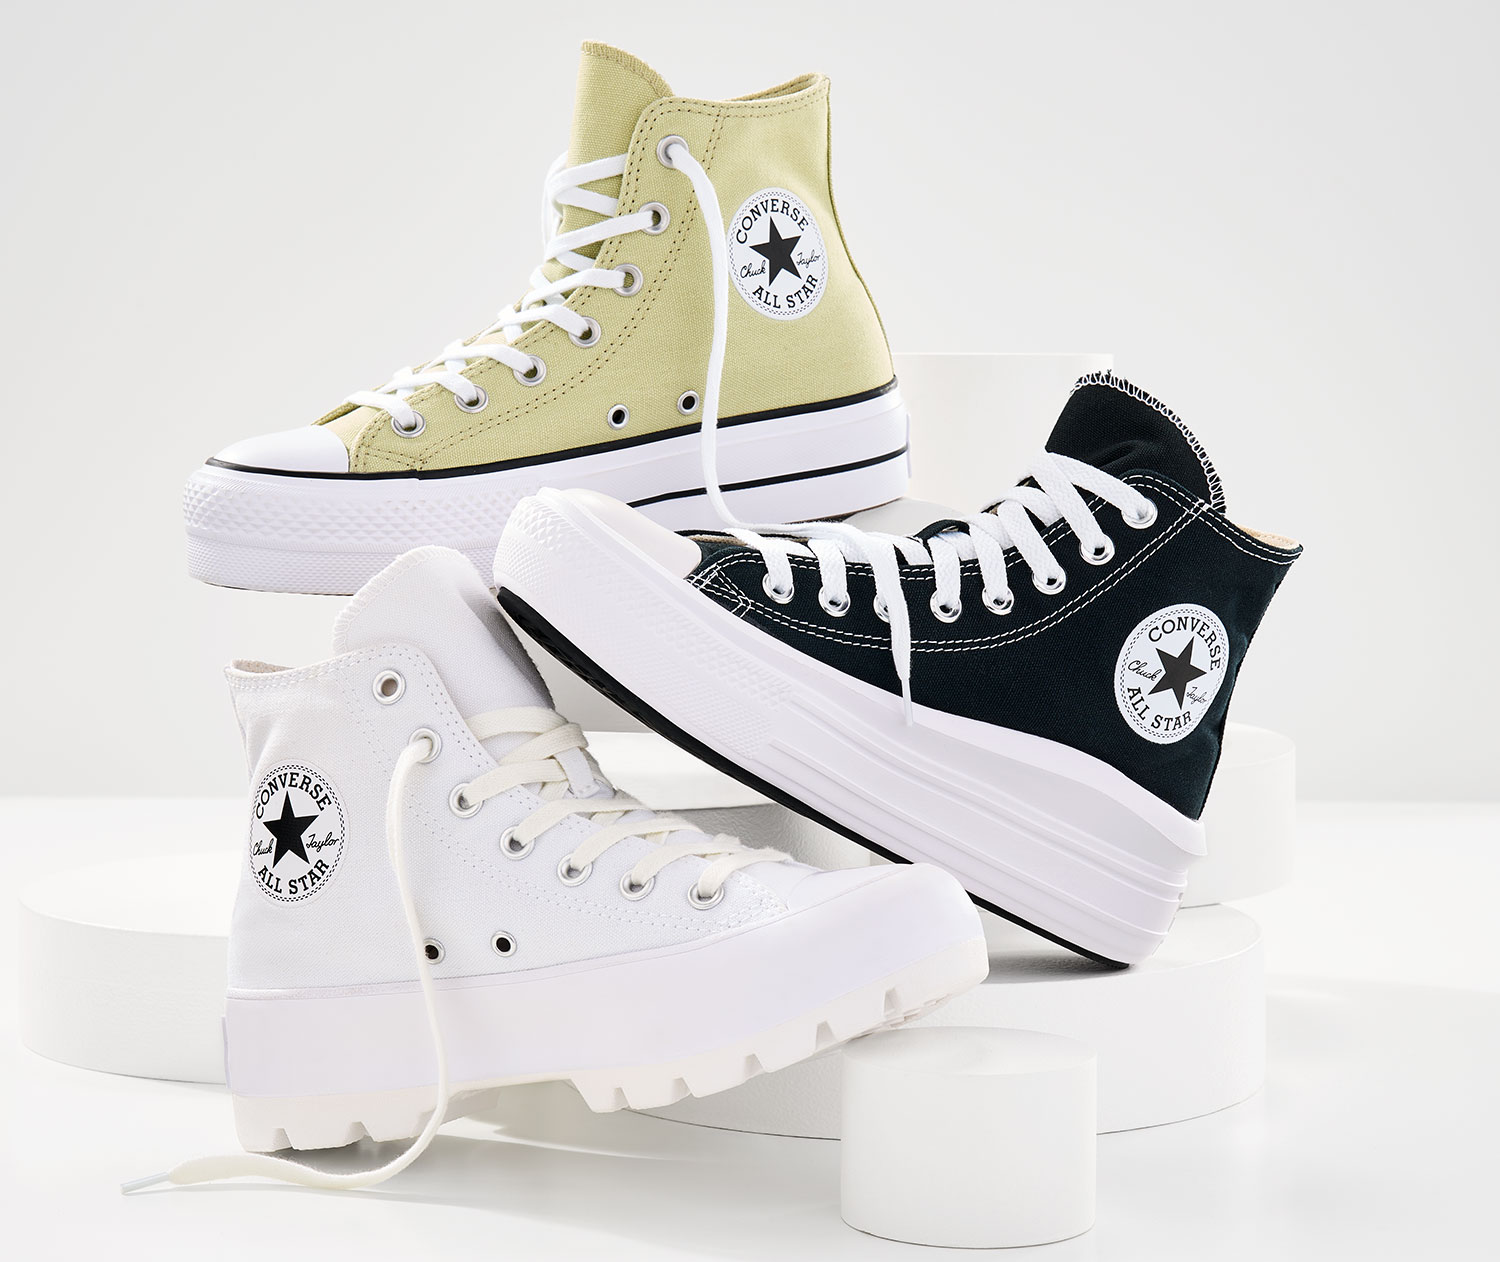 Chuck Taylor All Star platform shoes and sneakers.